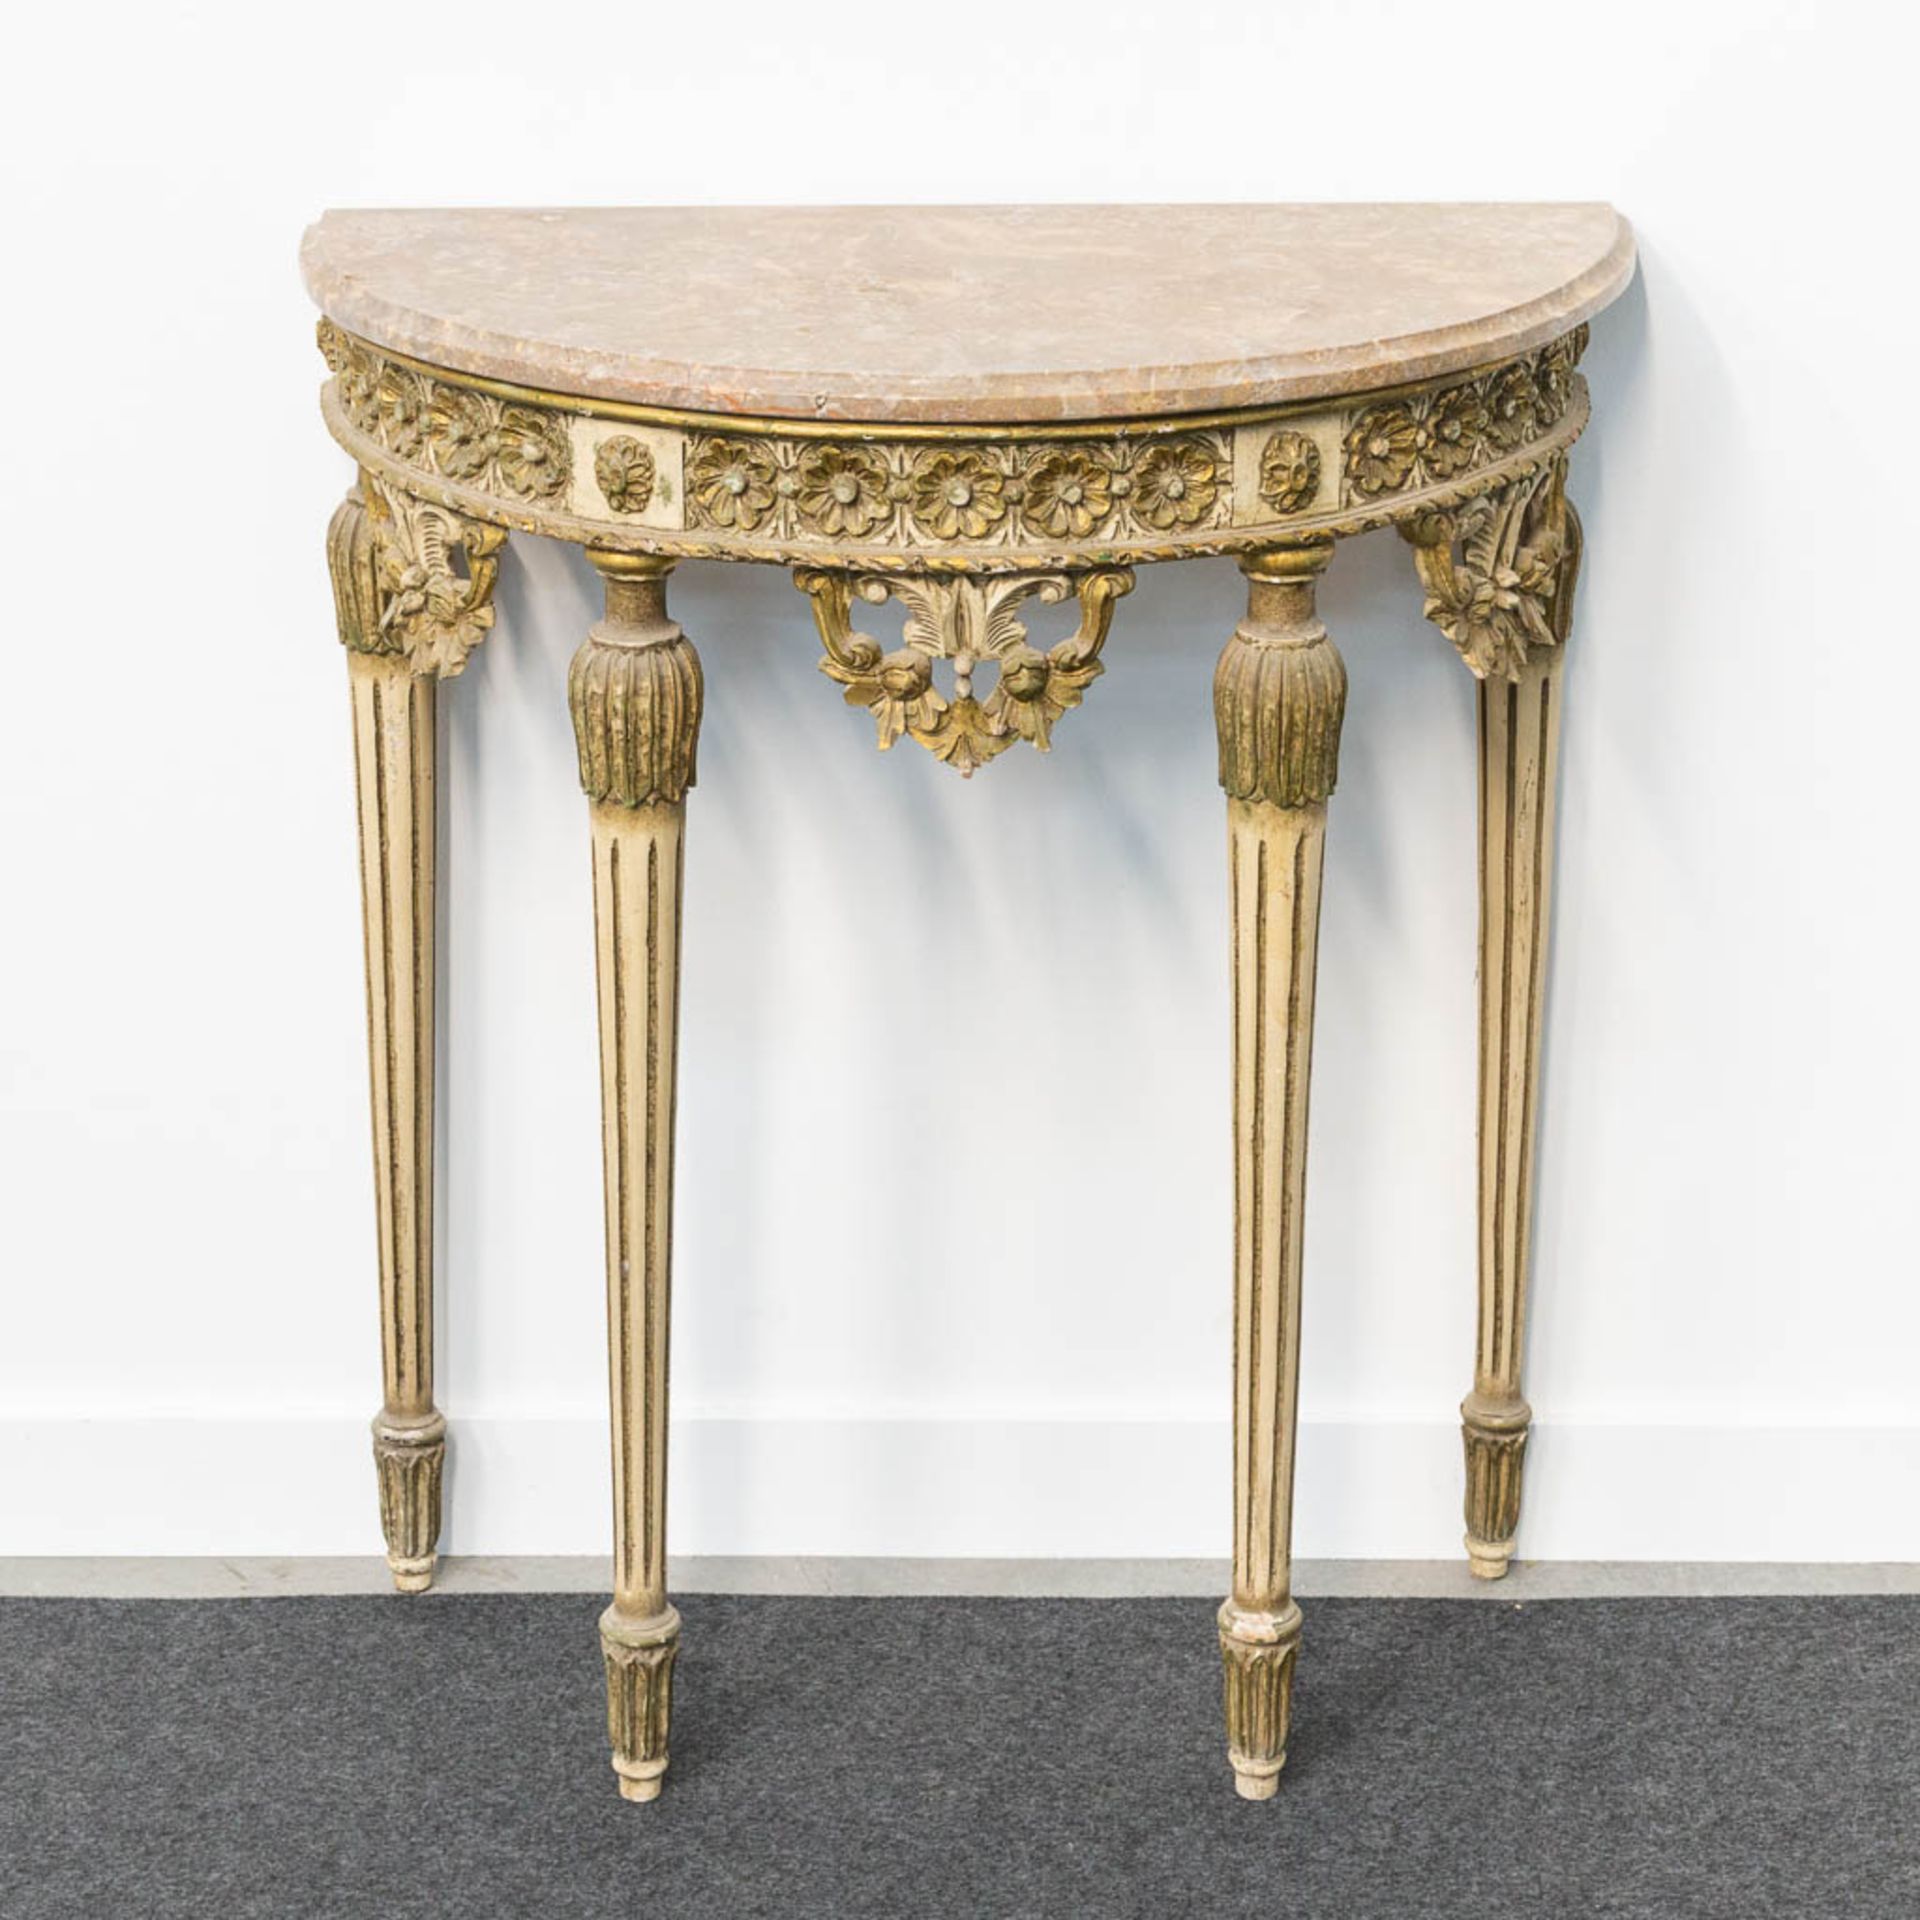 A Louis XVI style console table with marble top and sculptured wood decorations. - Image 2 of 12